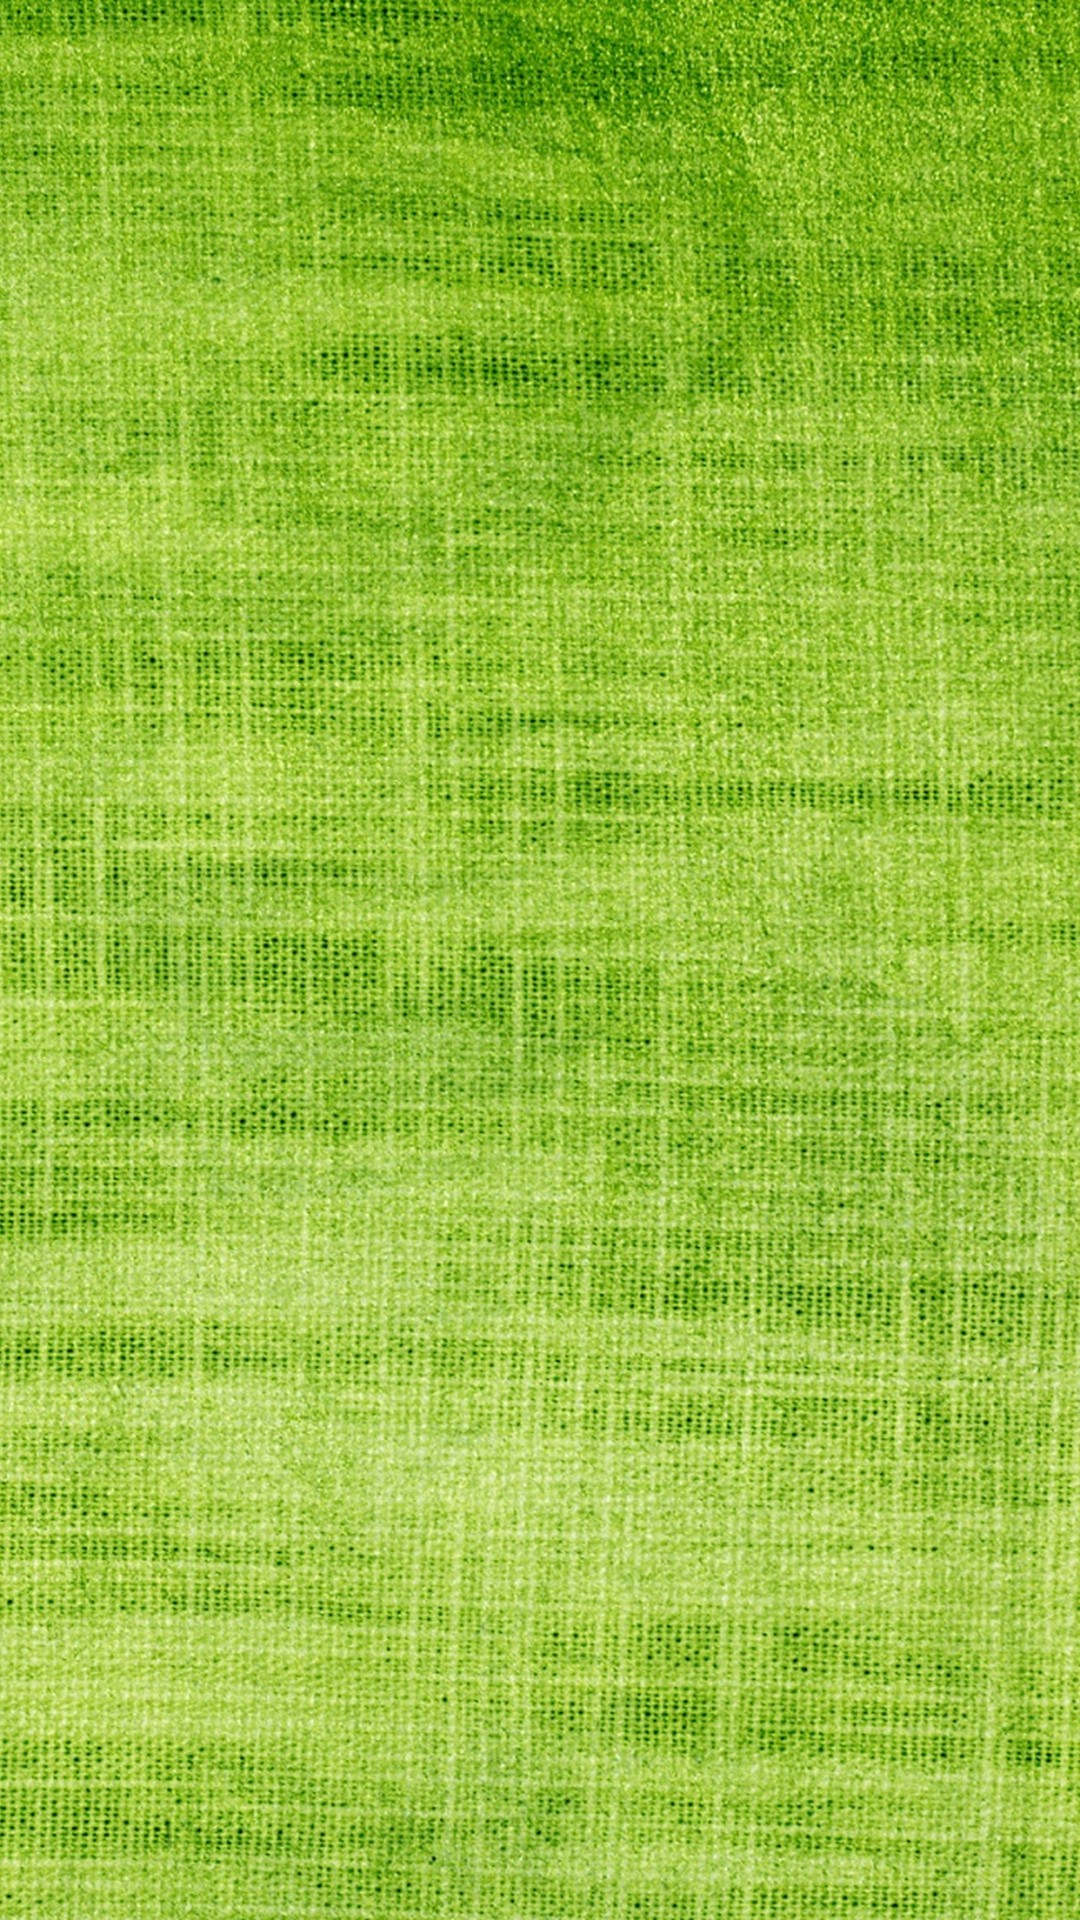 Mobile Wallpapers Lime Green with resolution 1080X1920 pixel. You can make this wallpaper for your iPhone 5, 6, 7, 8, X backgrounds, Mobile Screensaver, or iPad Lock Screen